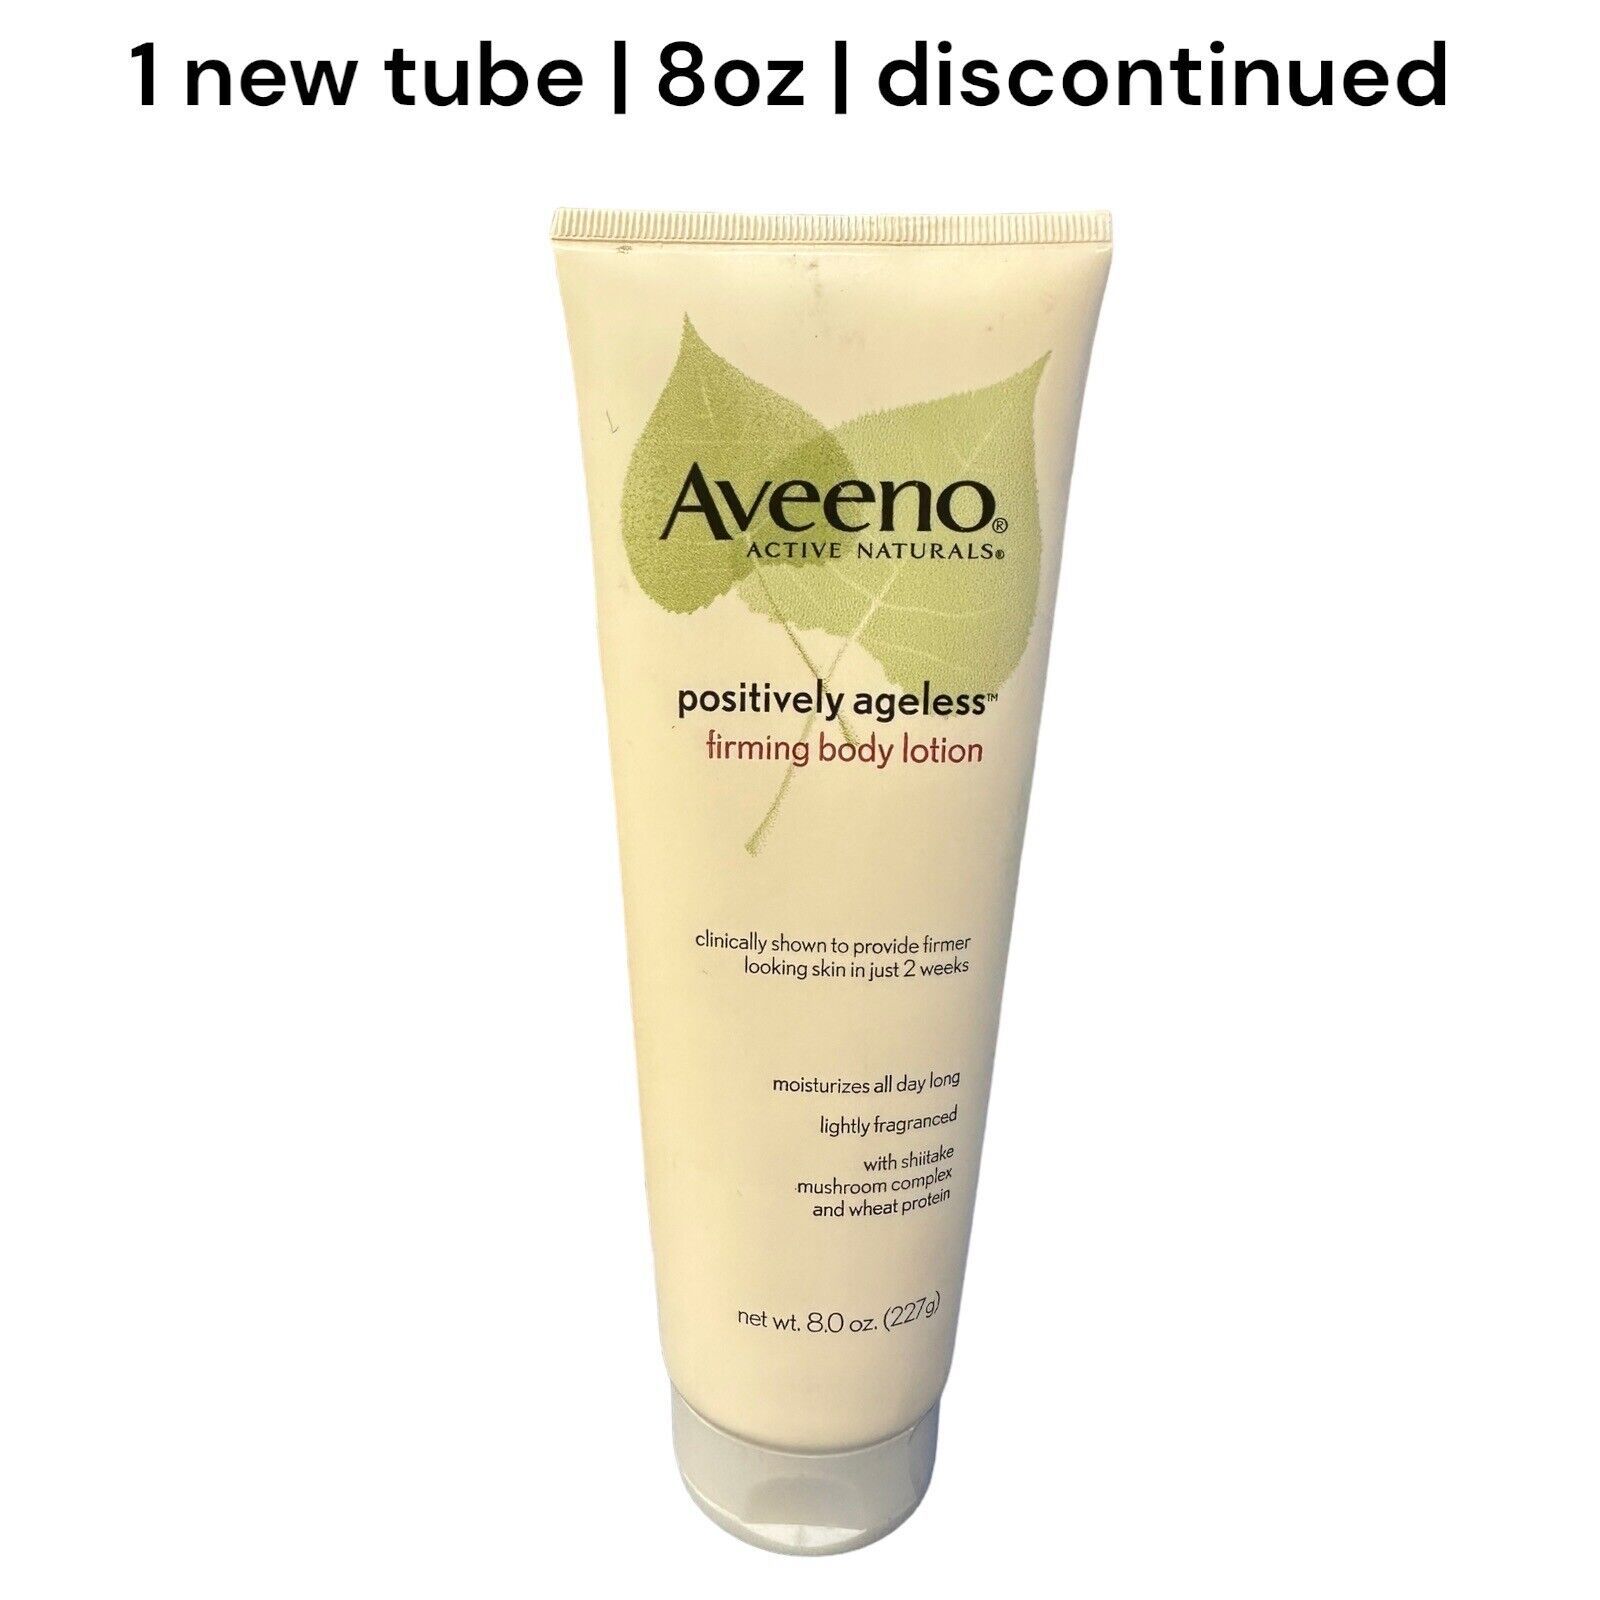 Aveeno Active Naturals Positively Ageless Firming Body Lotion 8oz Discontinued - $67.62